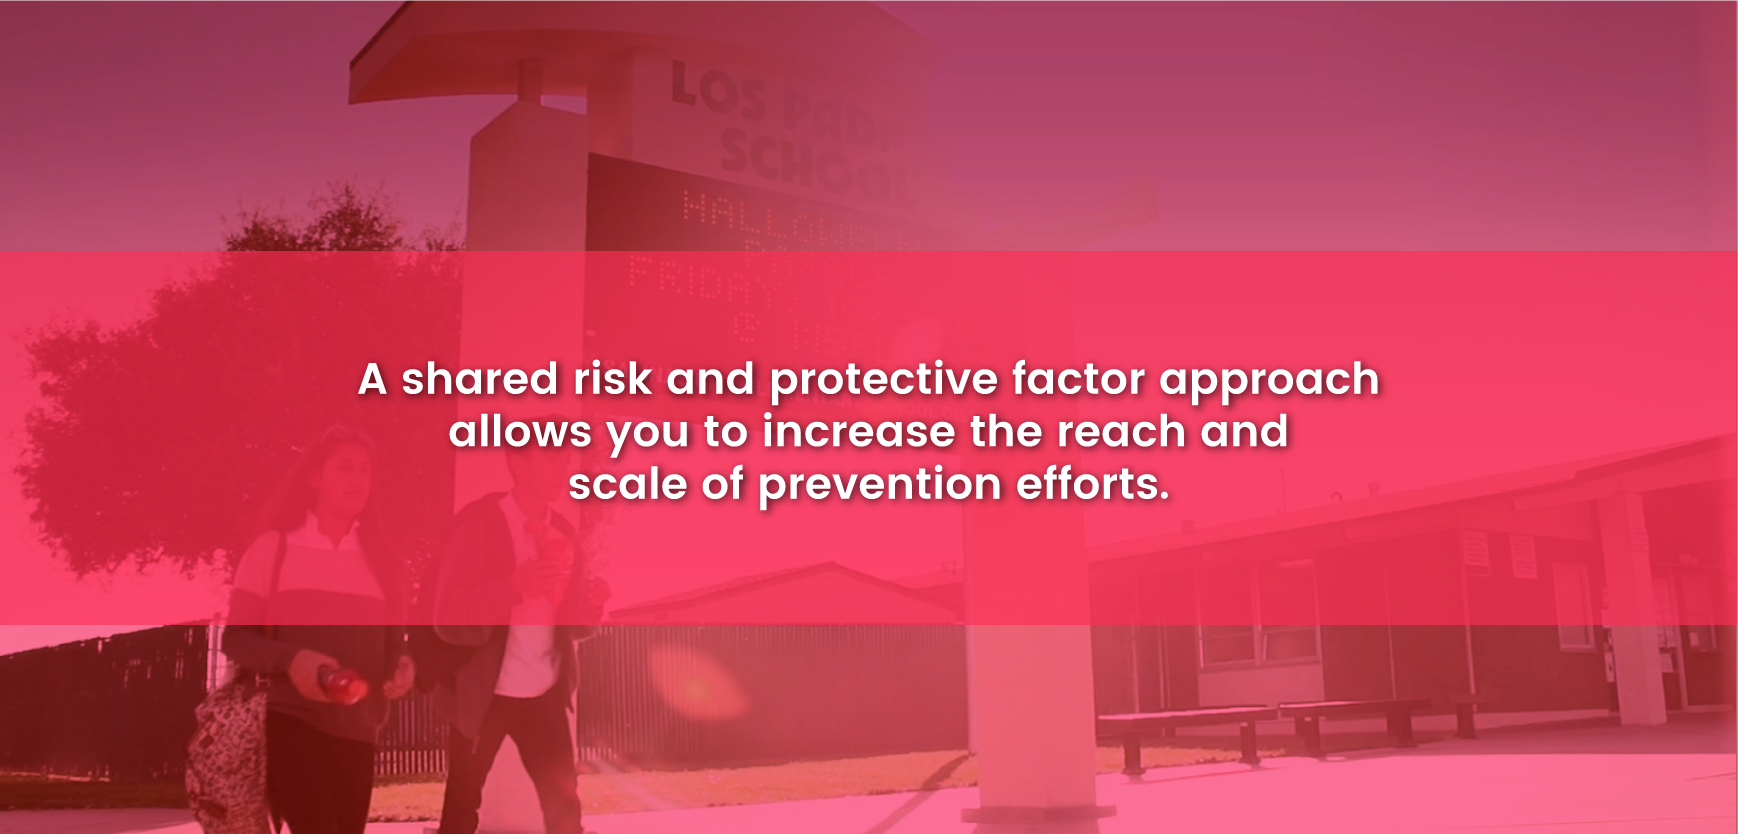 A shared risk and protective factor approach allows you to increase the reach and scale of prevention efforts